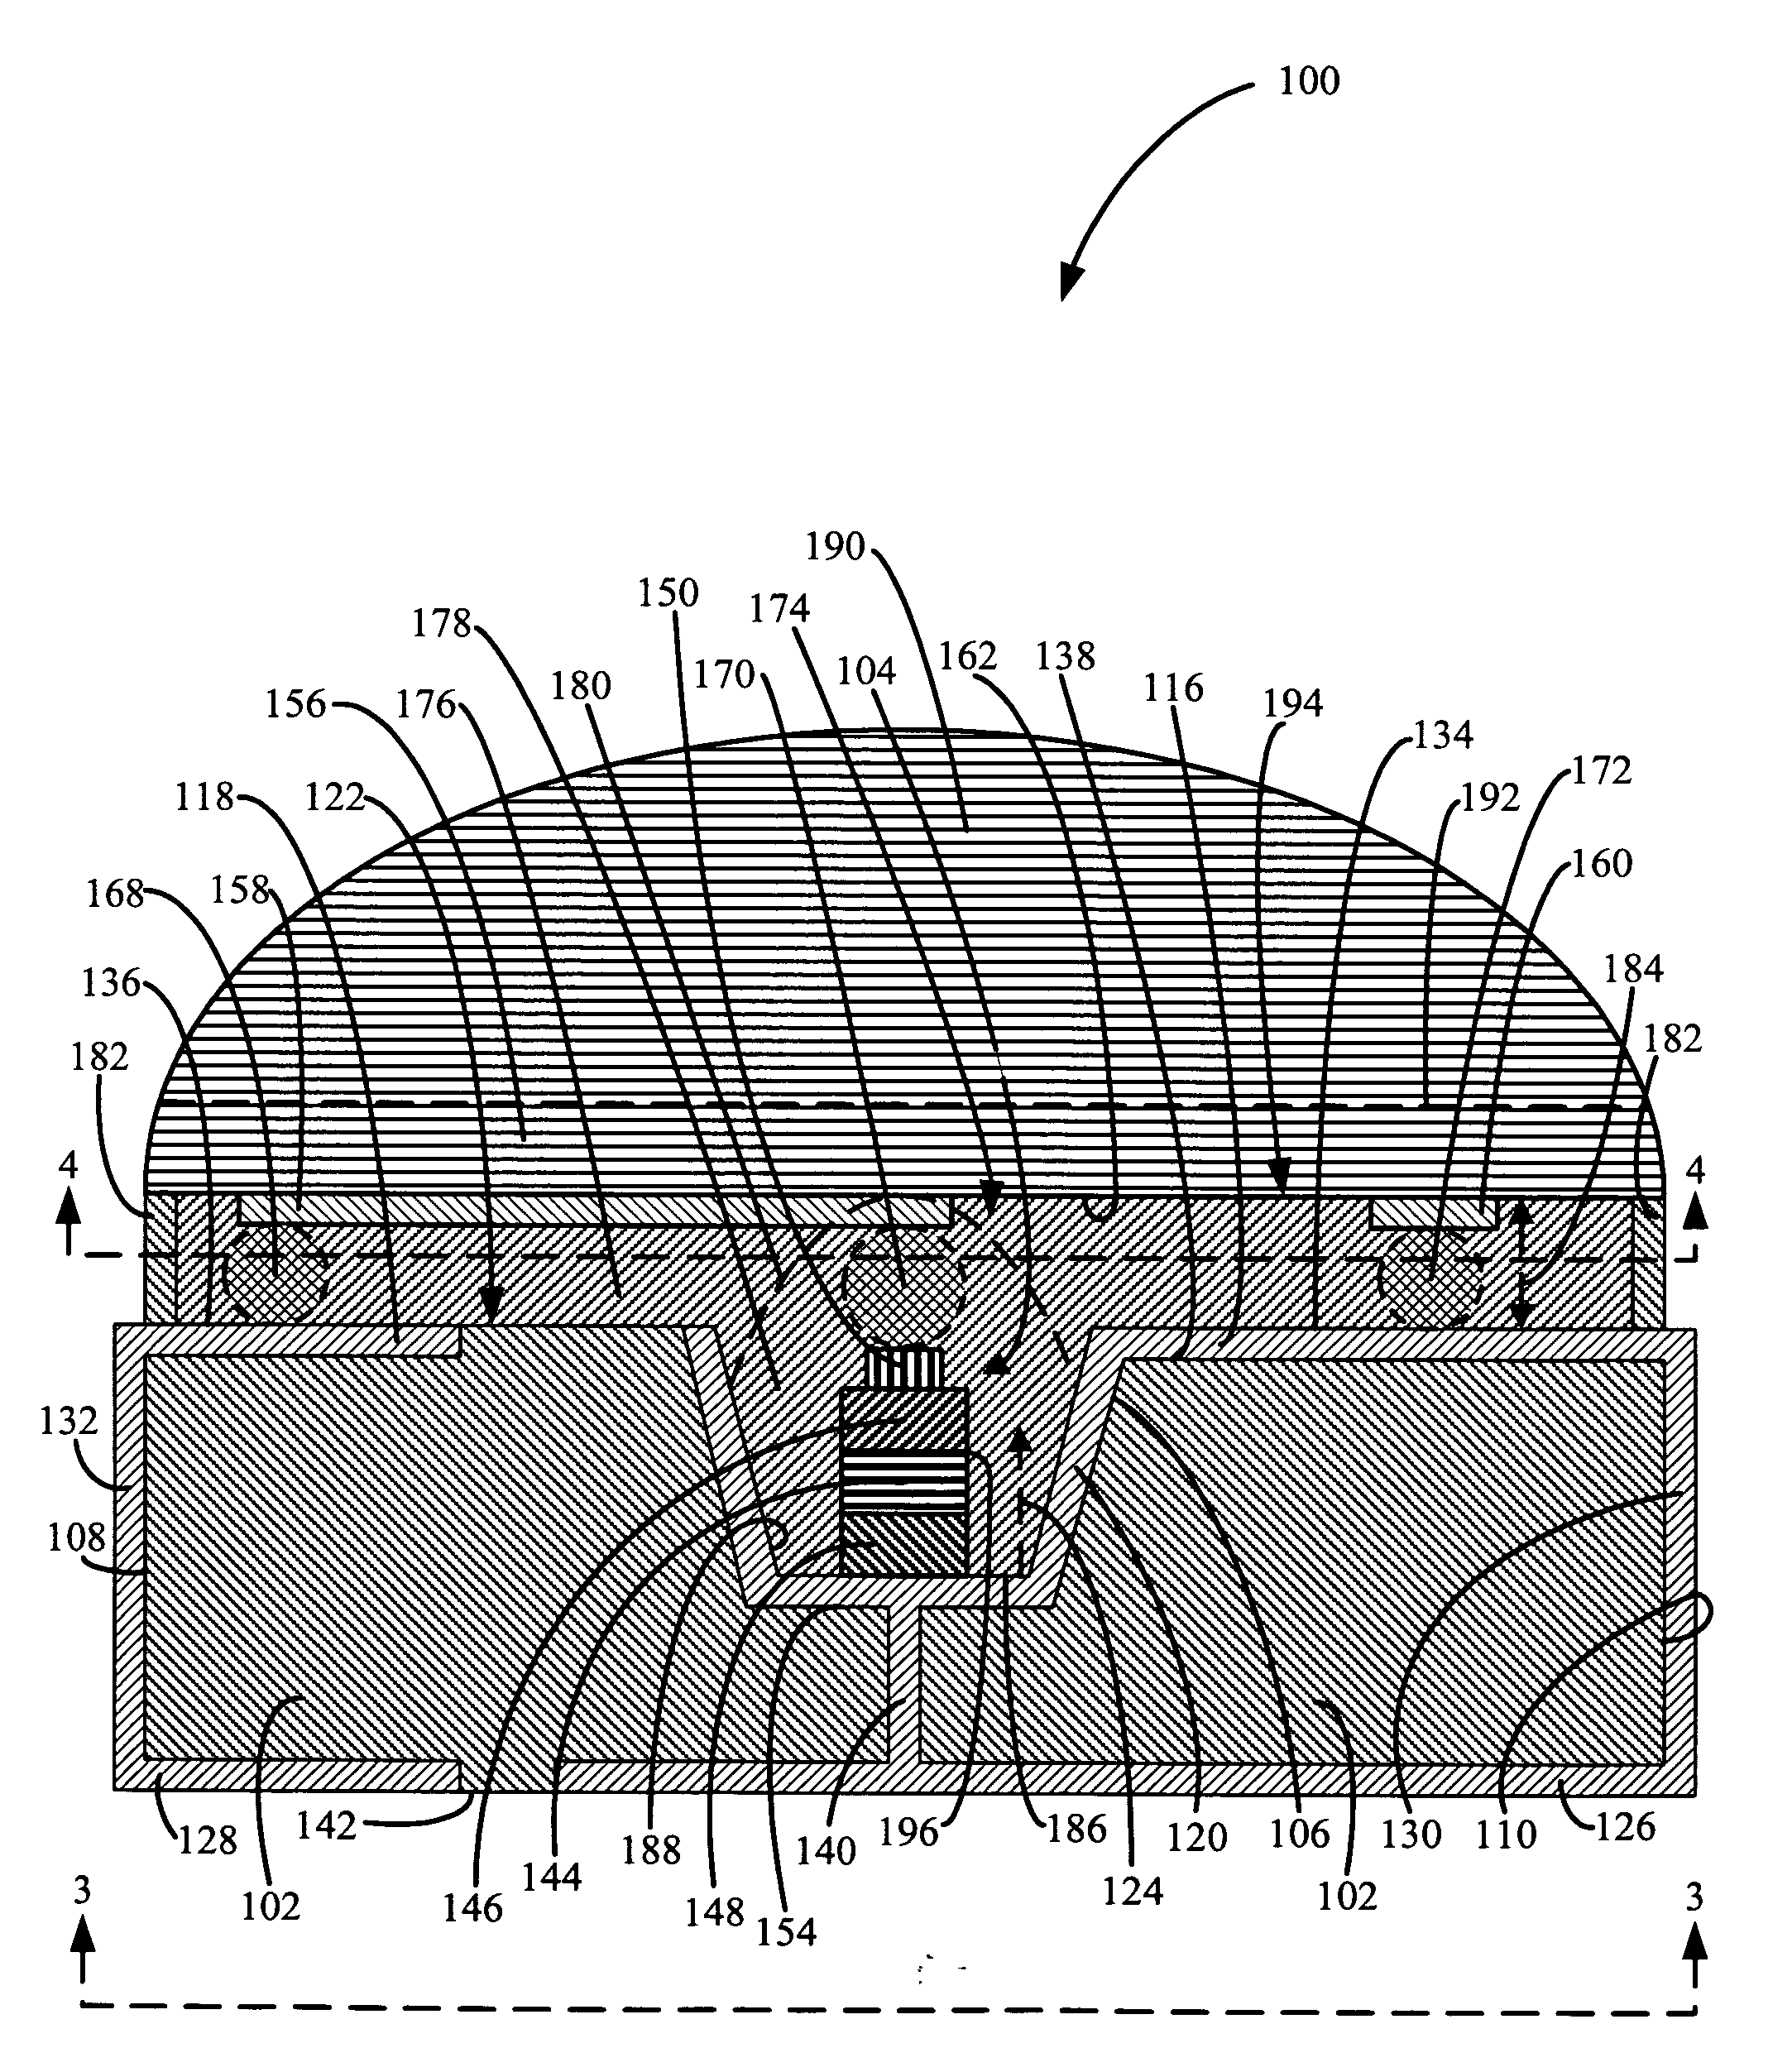 LED device having a top surface heat dissipator